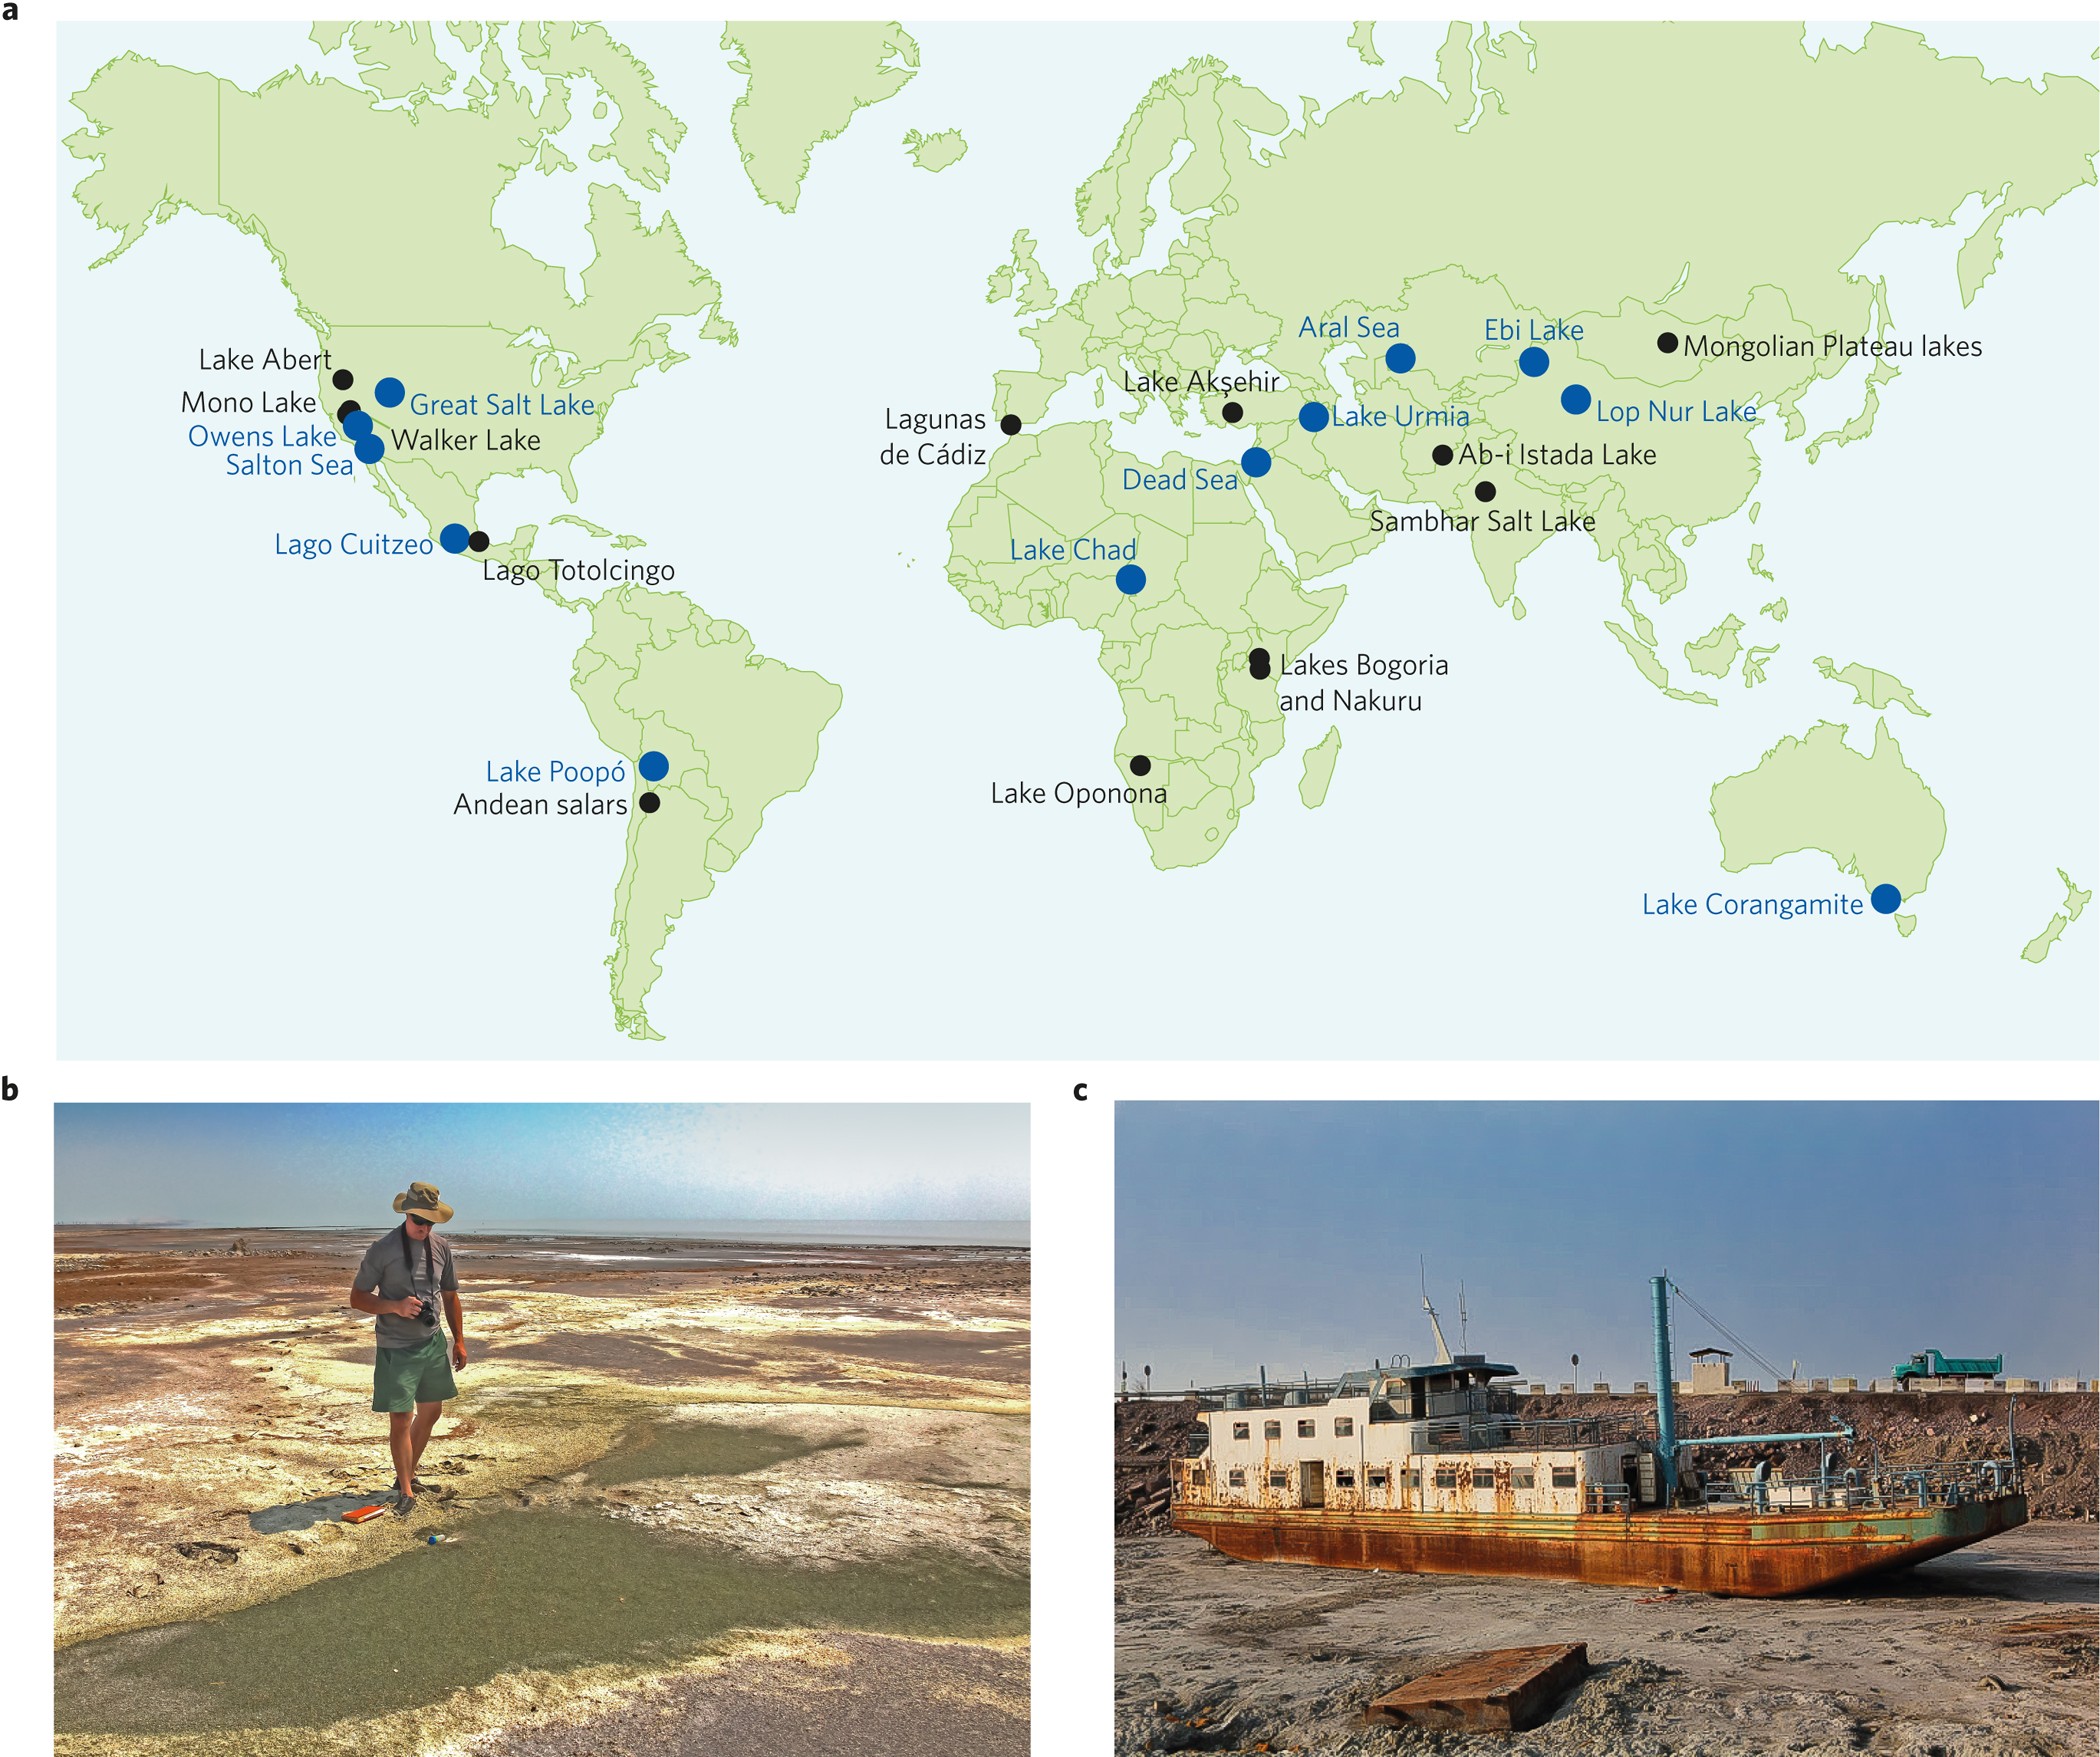 Decline of the world's saline lakes | Nature Geoscience